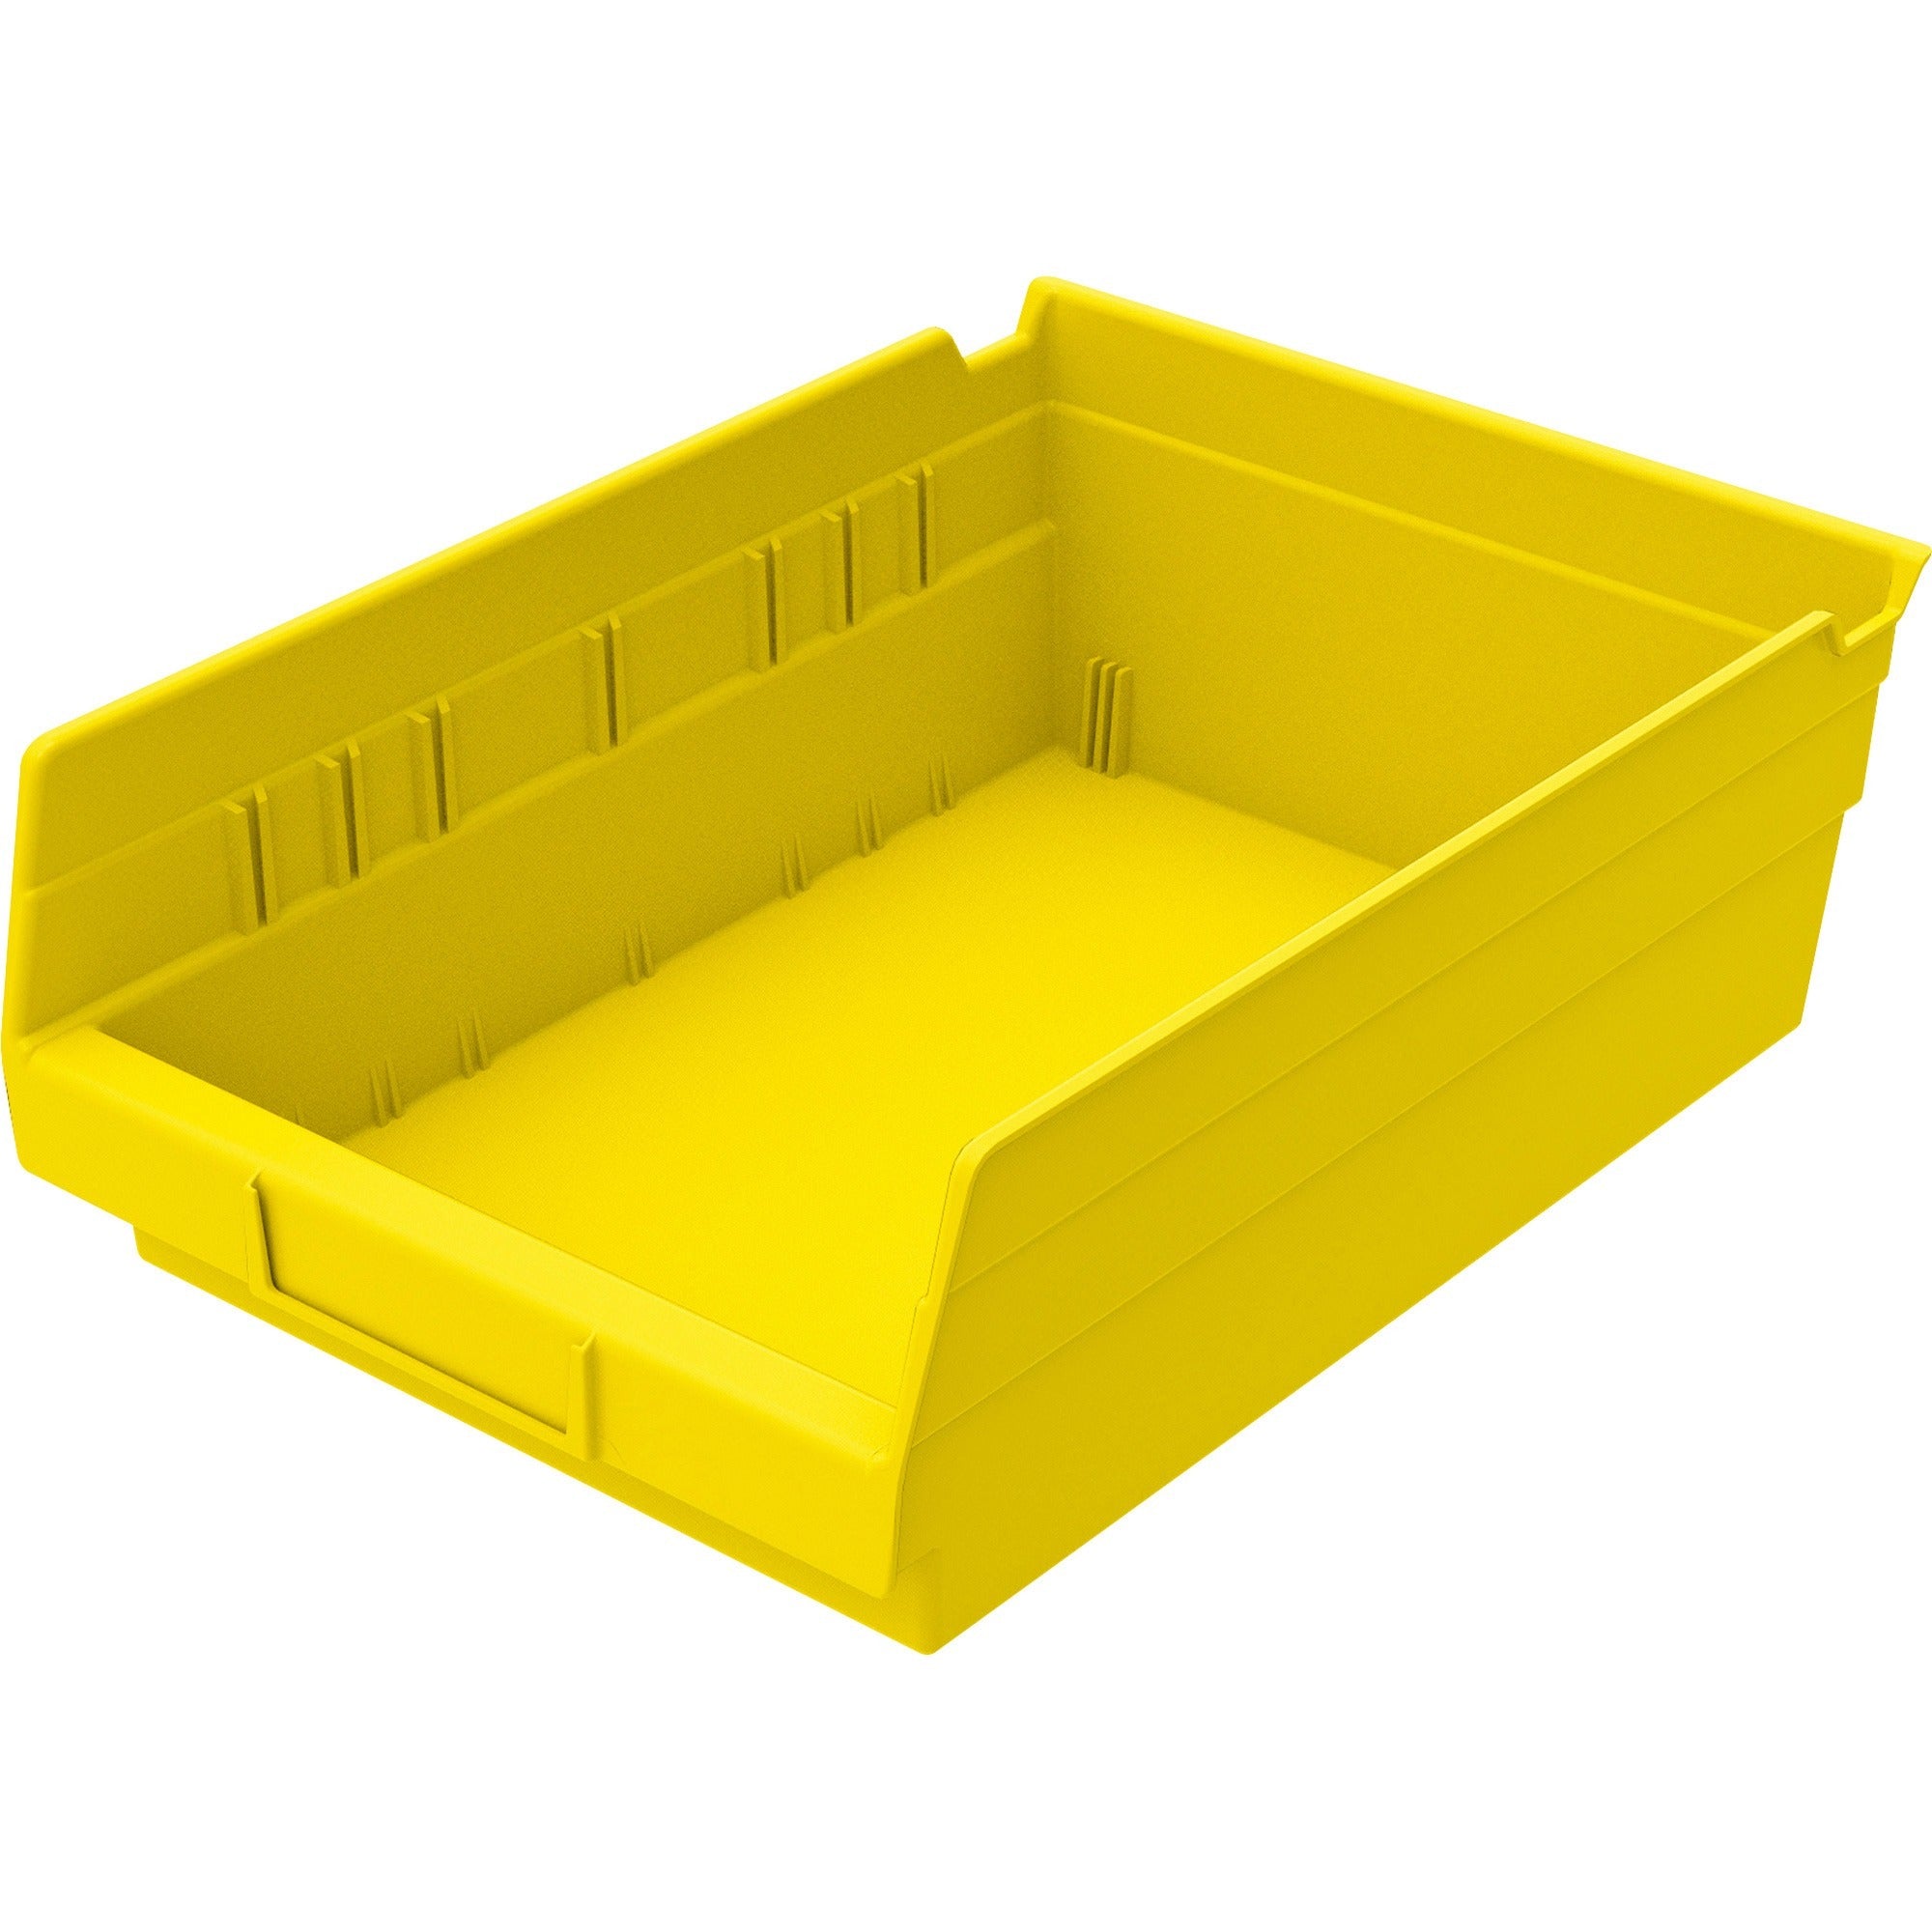 Akro-Mils Economical Storage Shelf Bins - 4" Height x 8.4" Width x 11.6" Depth - Water Proof, Label Holder, Durable, Oil Resistant, Grease Resistant - Yellow - Polymer - 1 Each - 